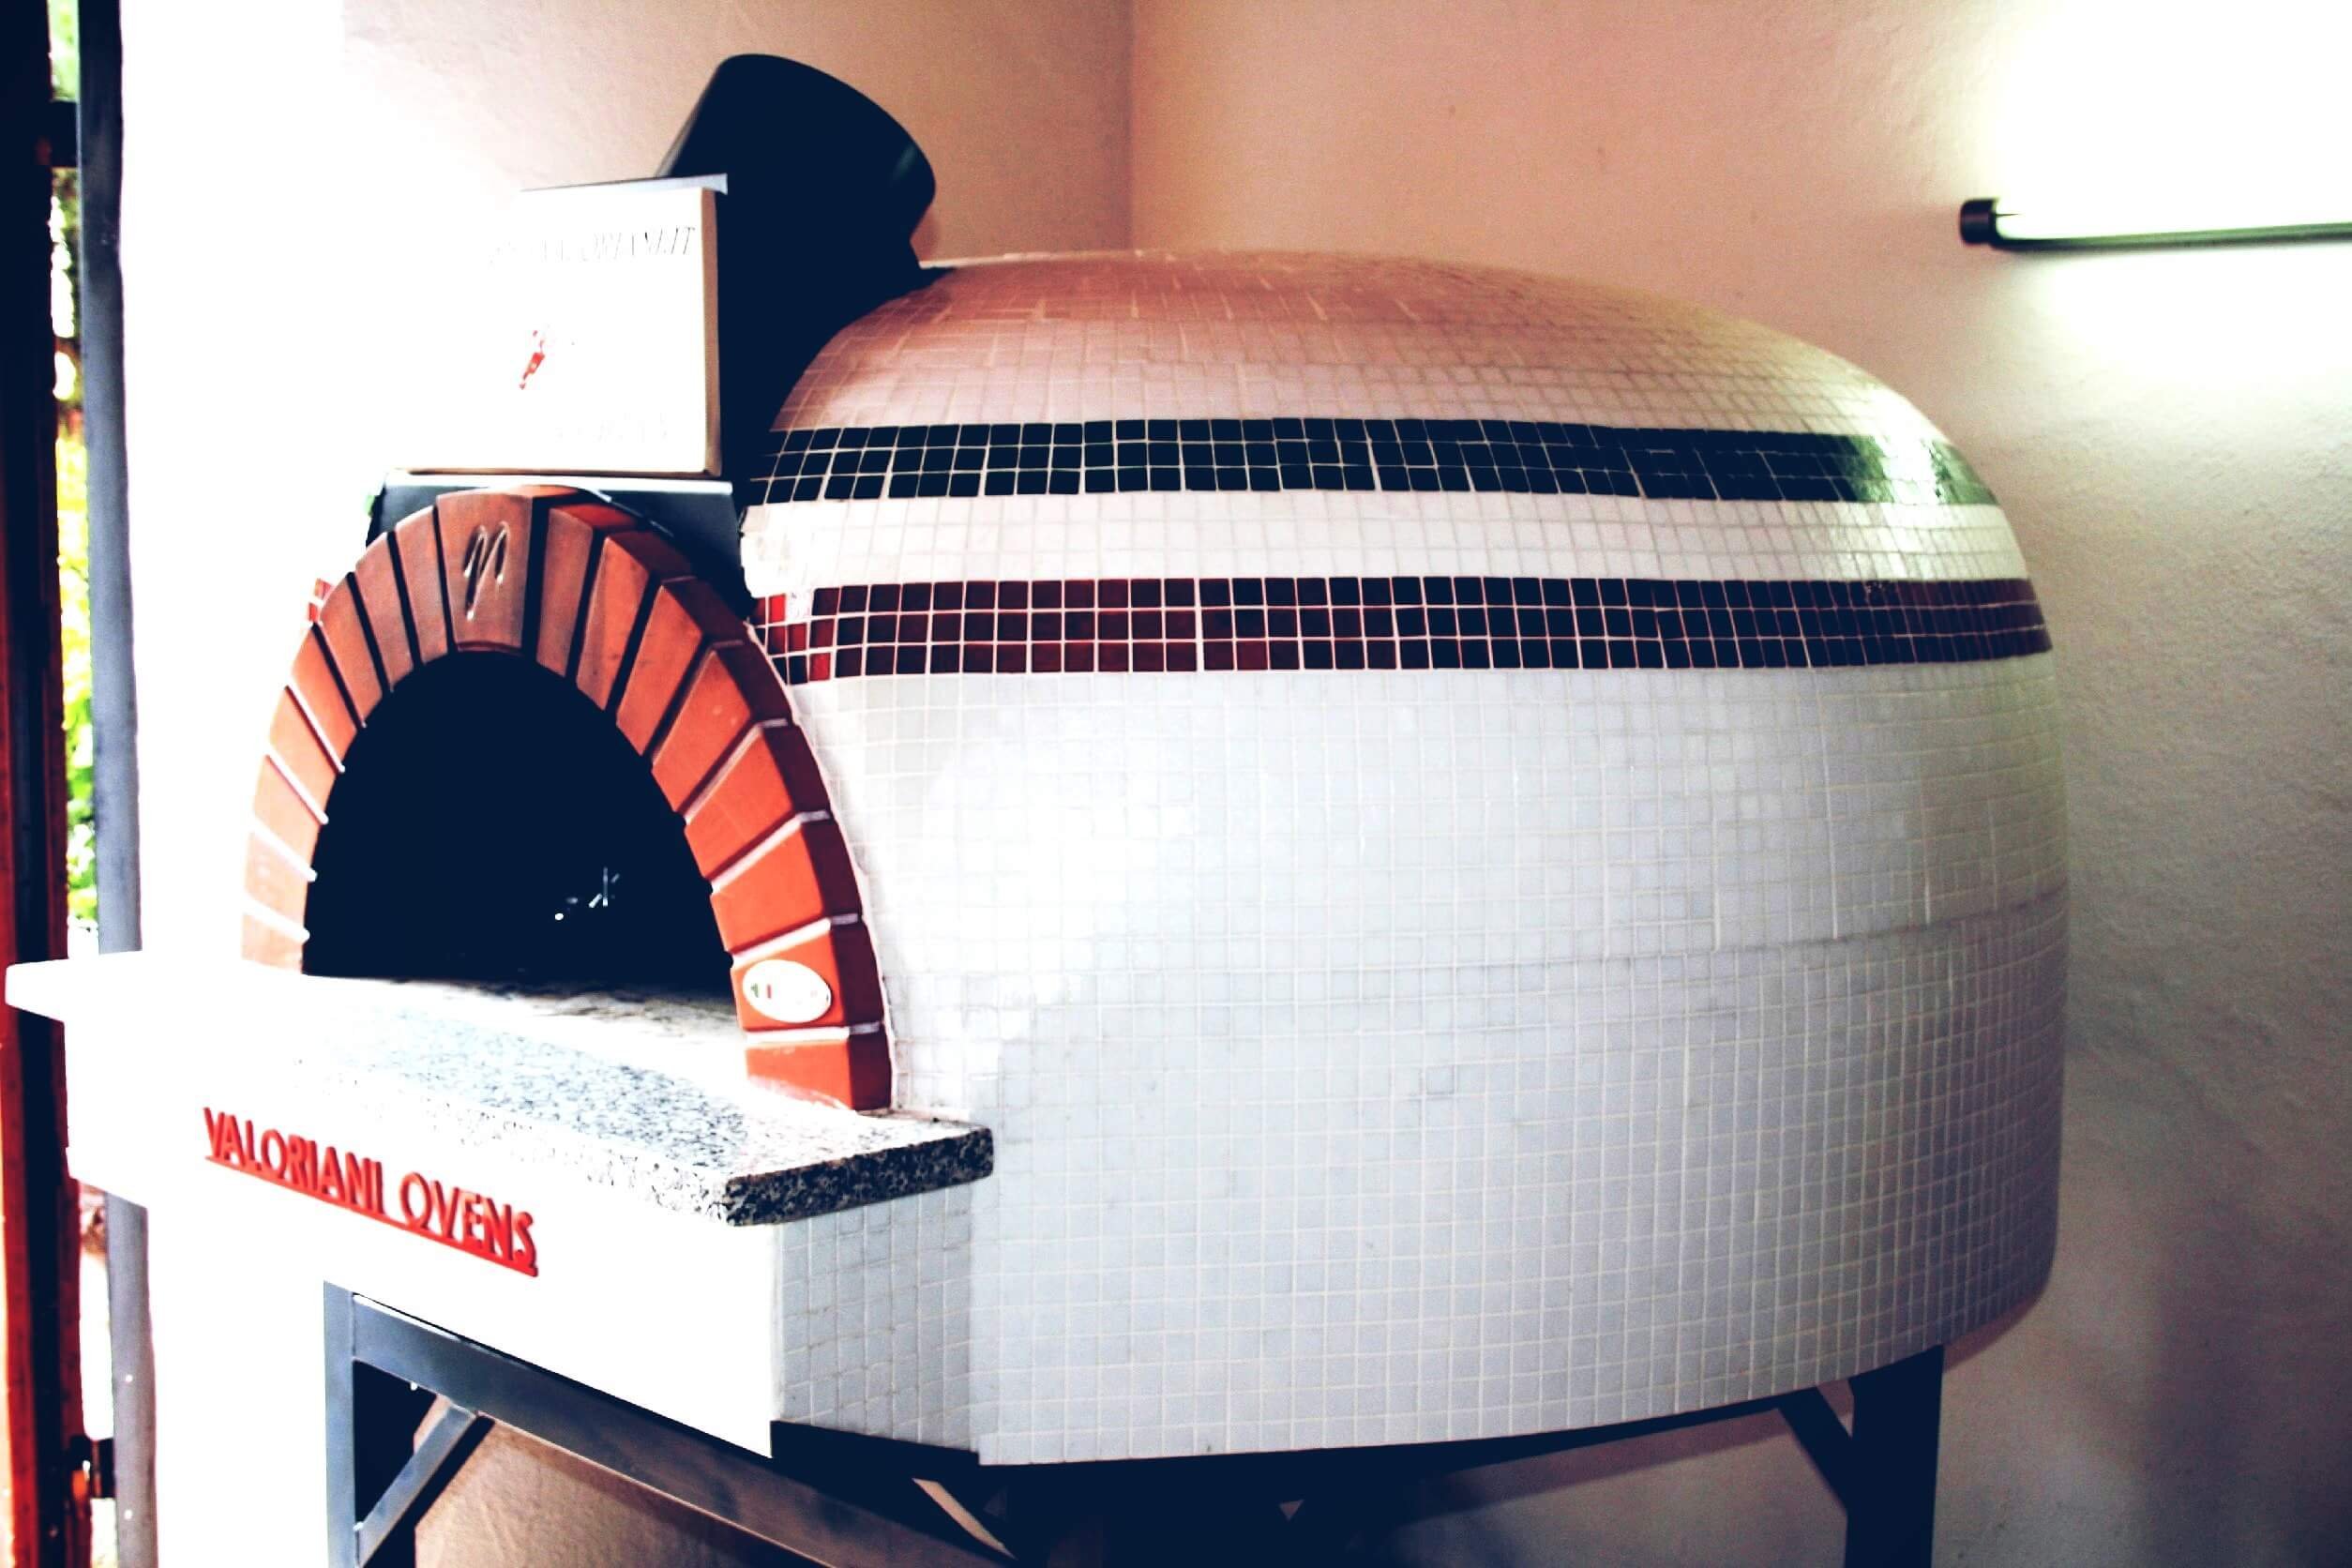 Professional pizza and baking oven, wood firing for continuous firing, Valoriani Vesuvio GR, 90cm